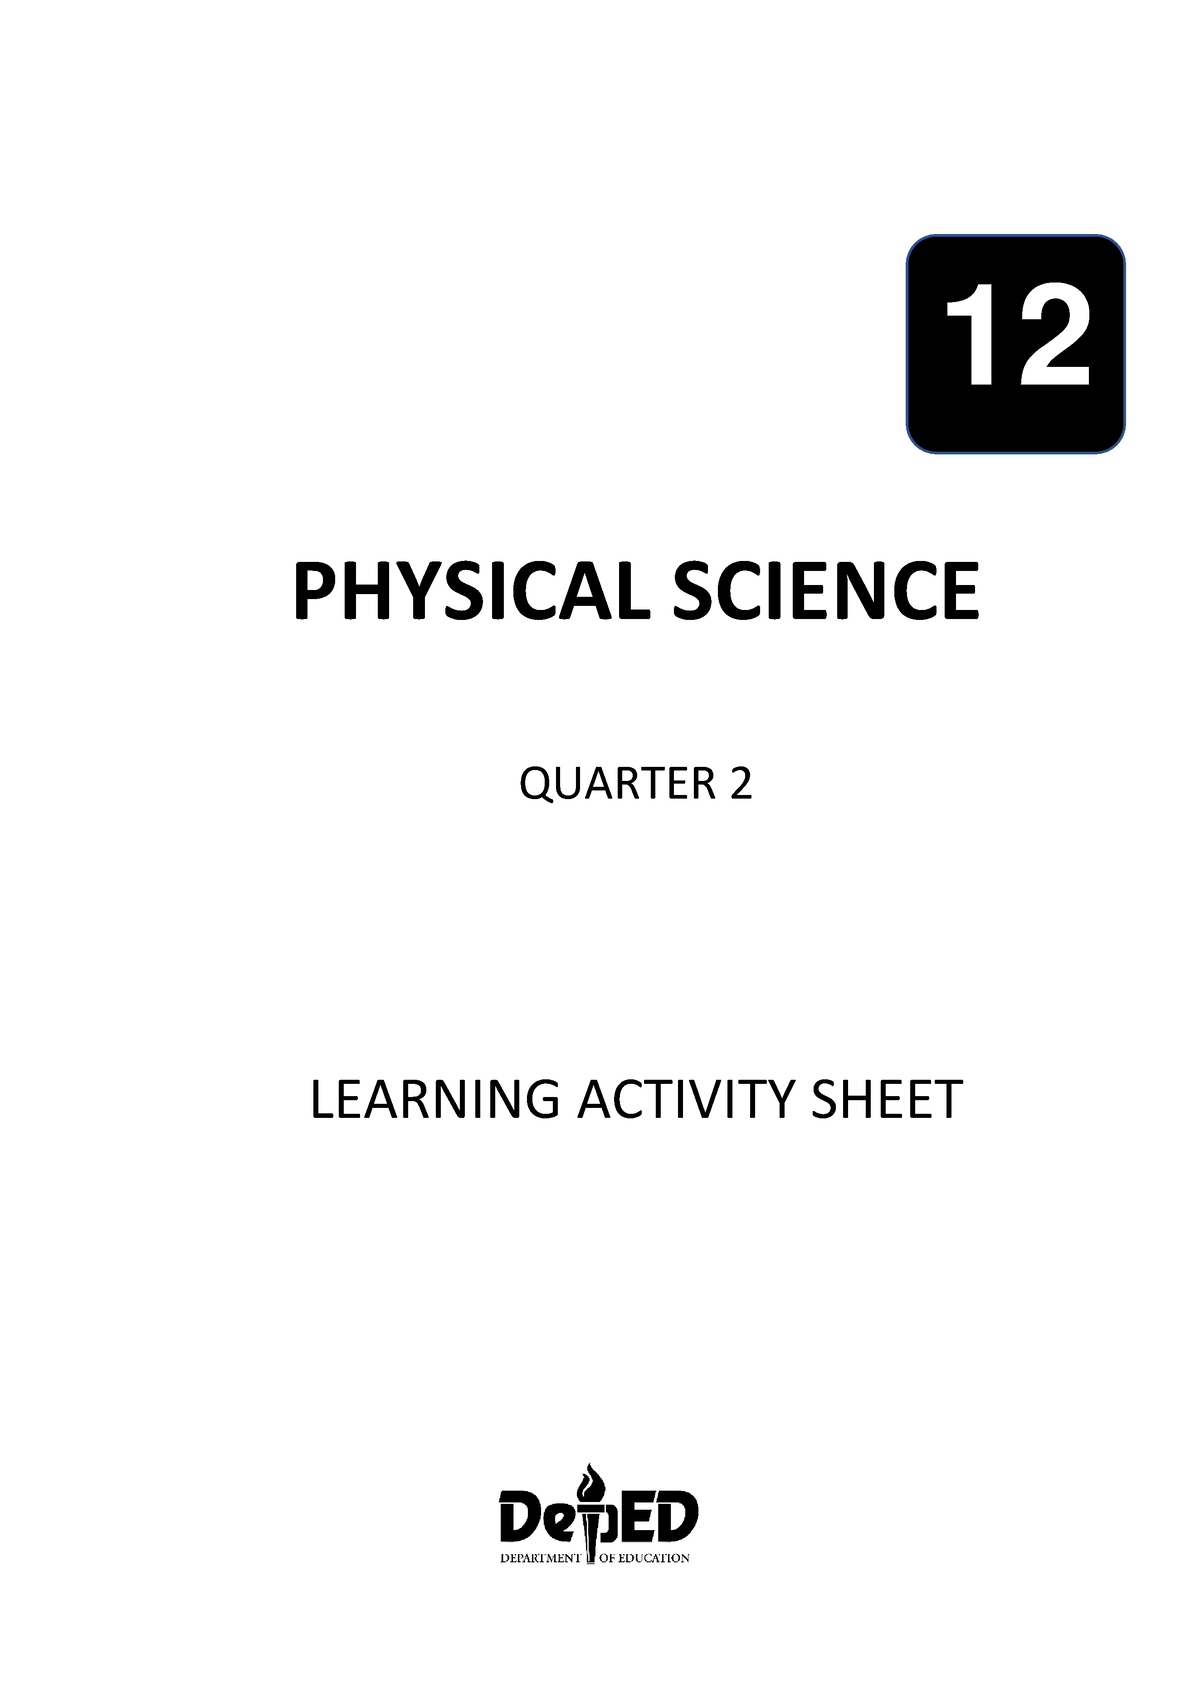 Physical Science Q2 Las 12 Physical Science Quarter 2 Learning Activity Sheet Address 7880